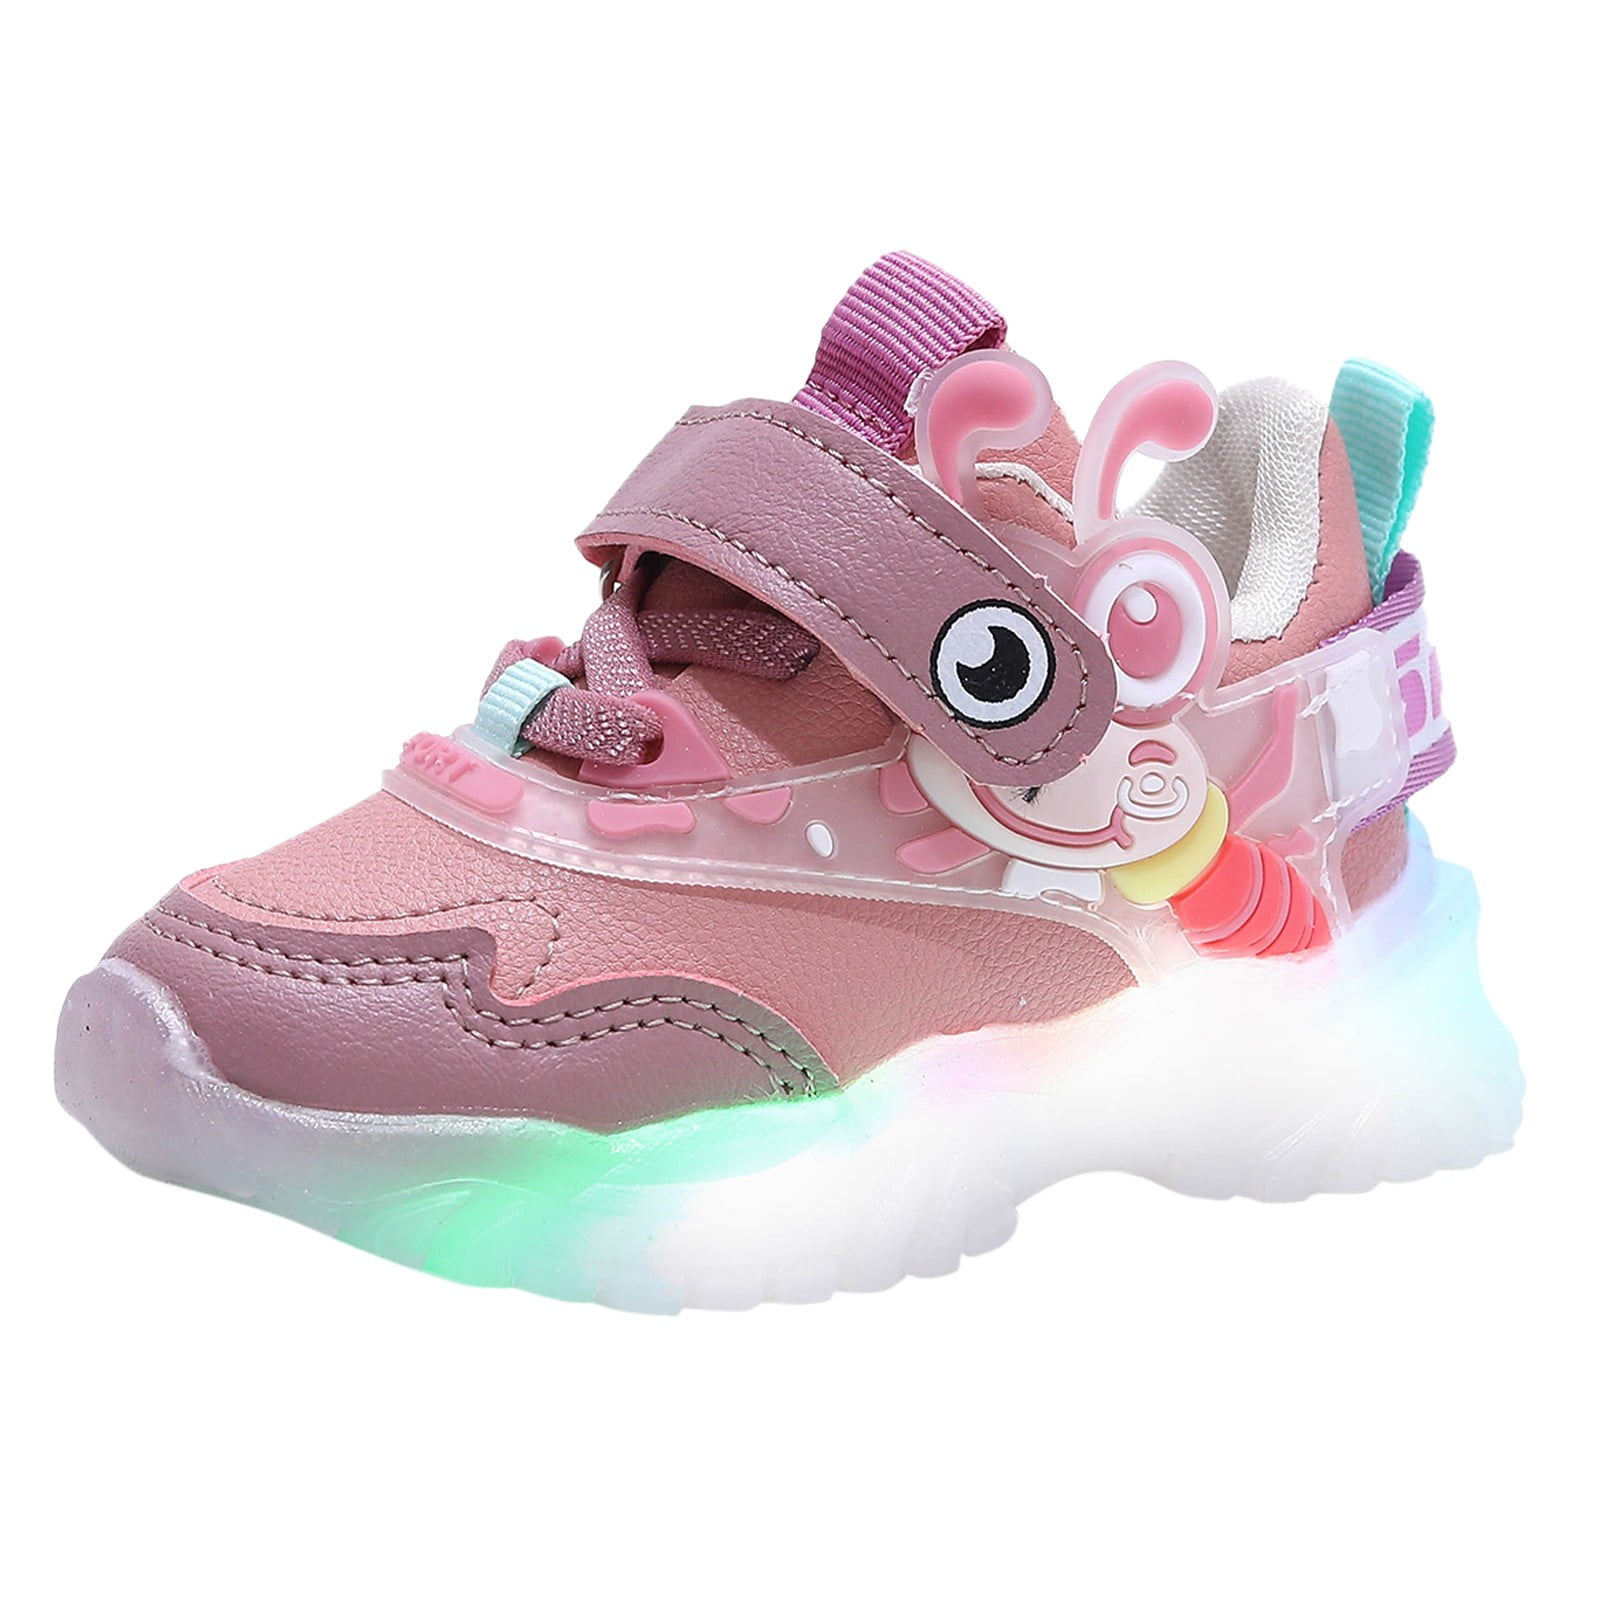 Up Shoes Girls Toddler LED Shoes Girls Kids Children Baby Casual Lovely LED Sneakers Child Footwear - Walmart.com